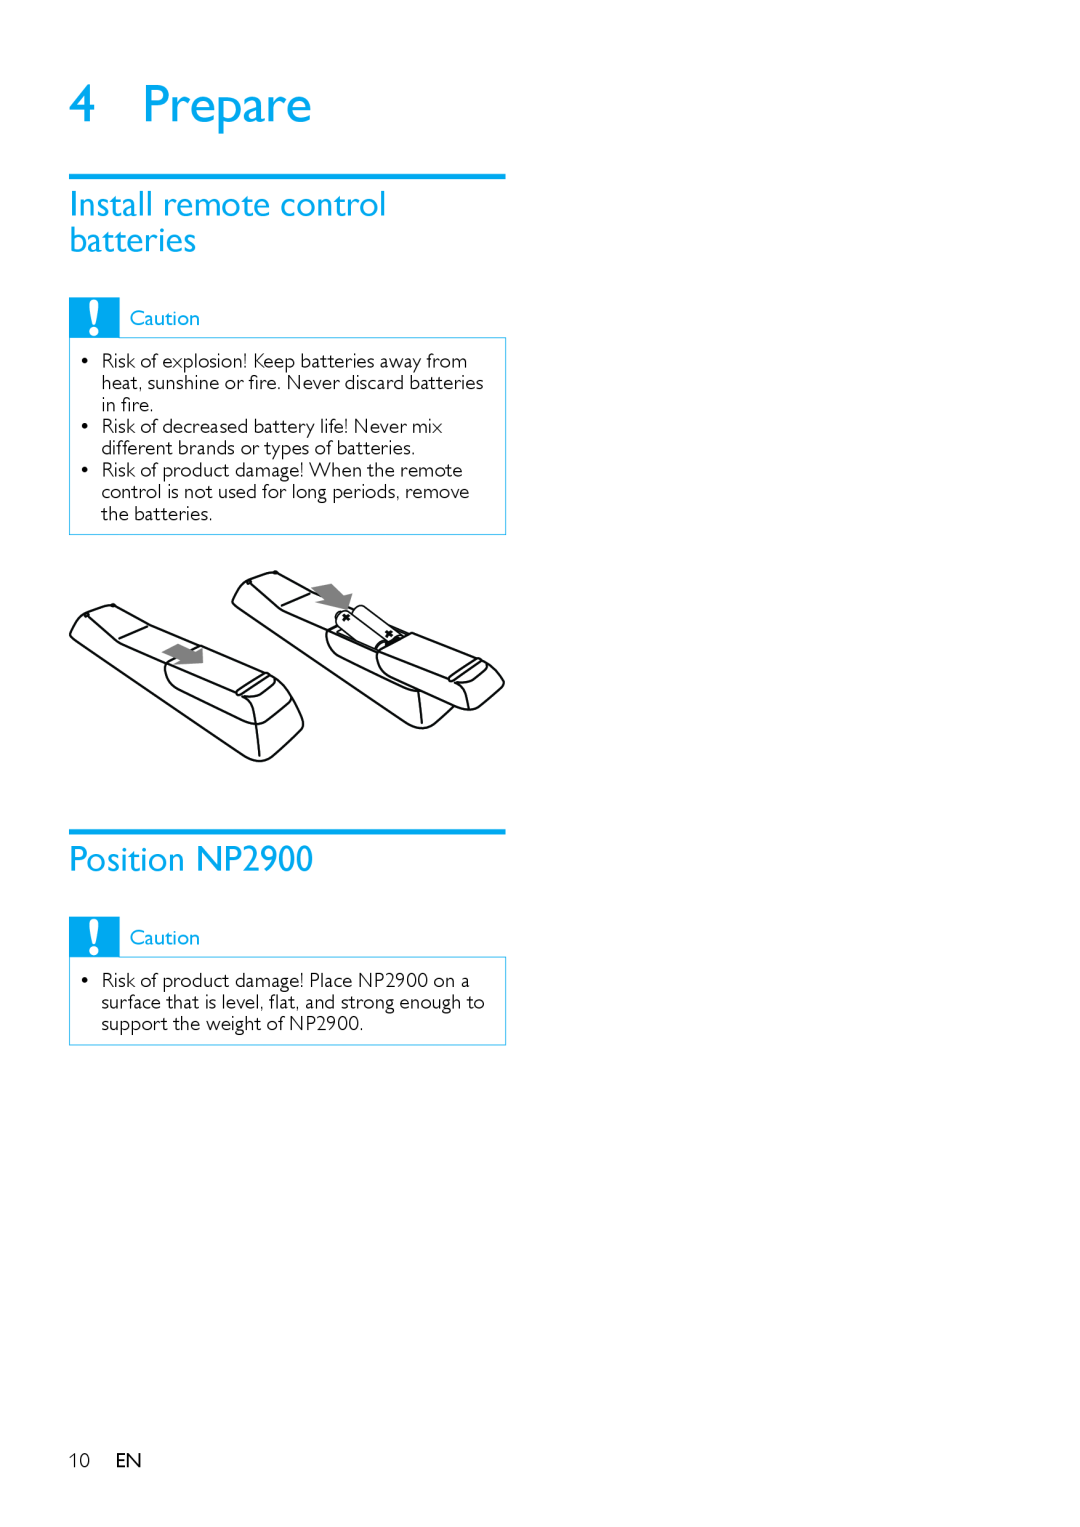 Philips user manual Prepare, Install remote control batteries, Position NP2900 